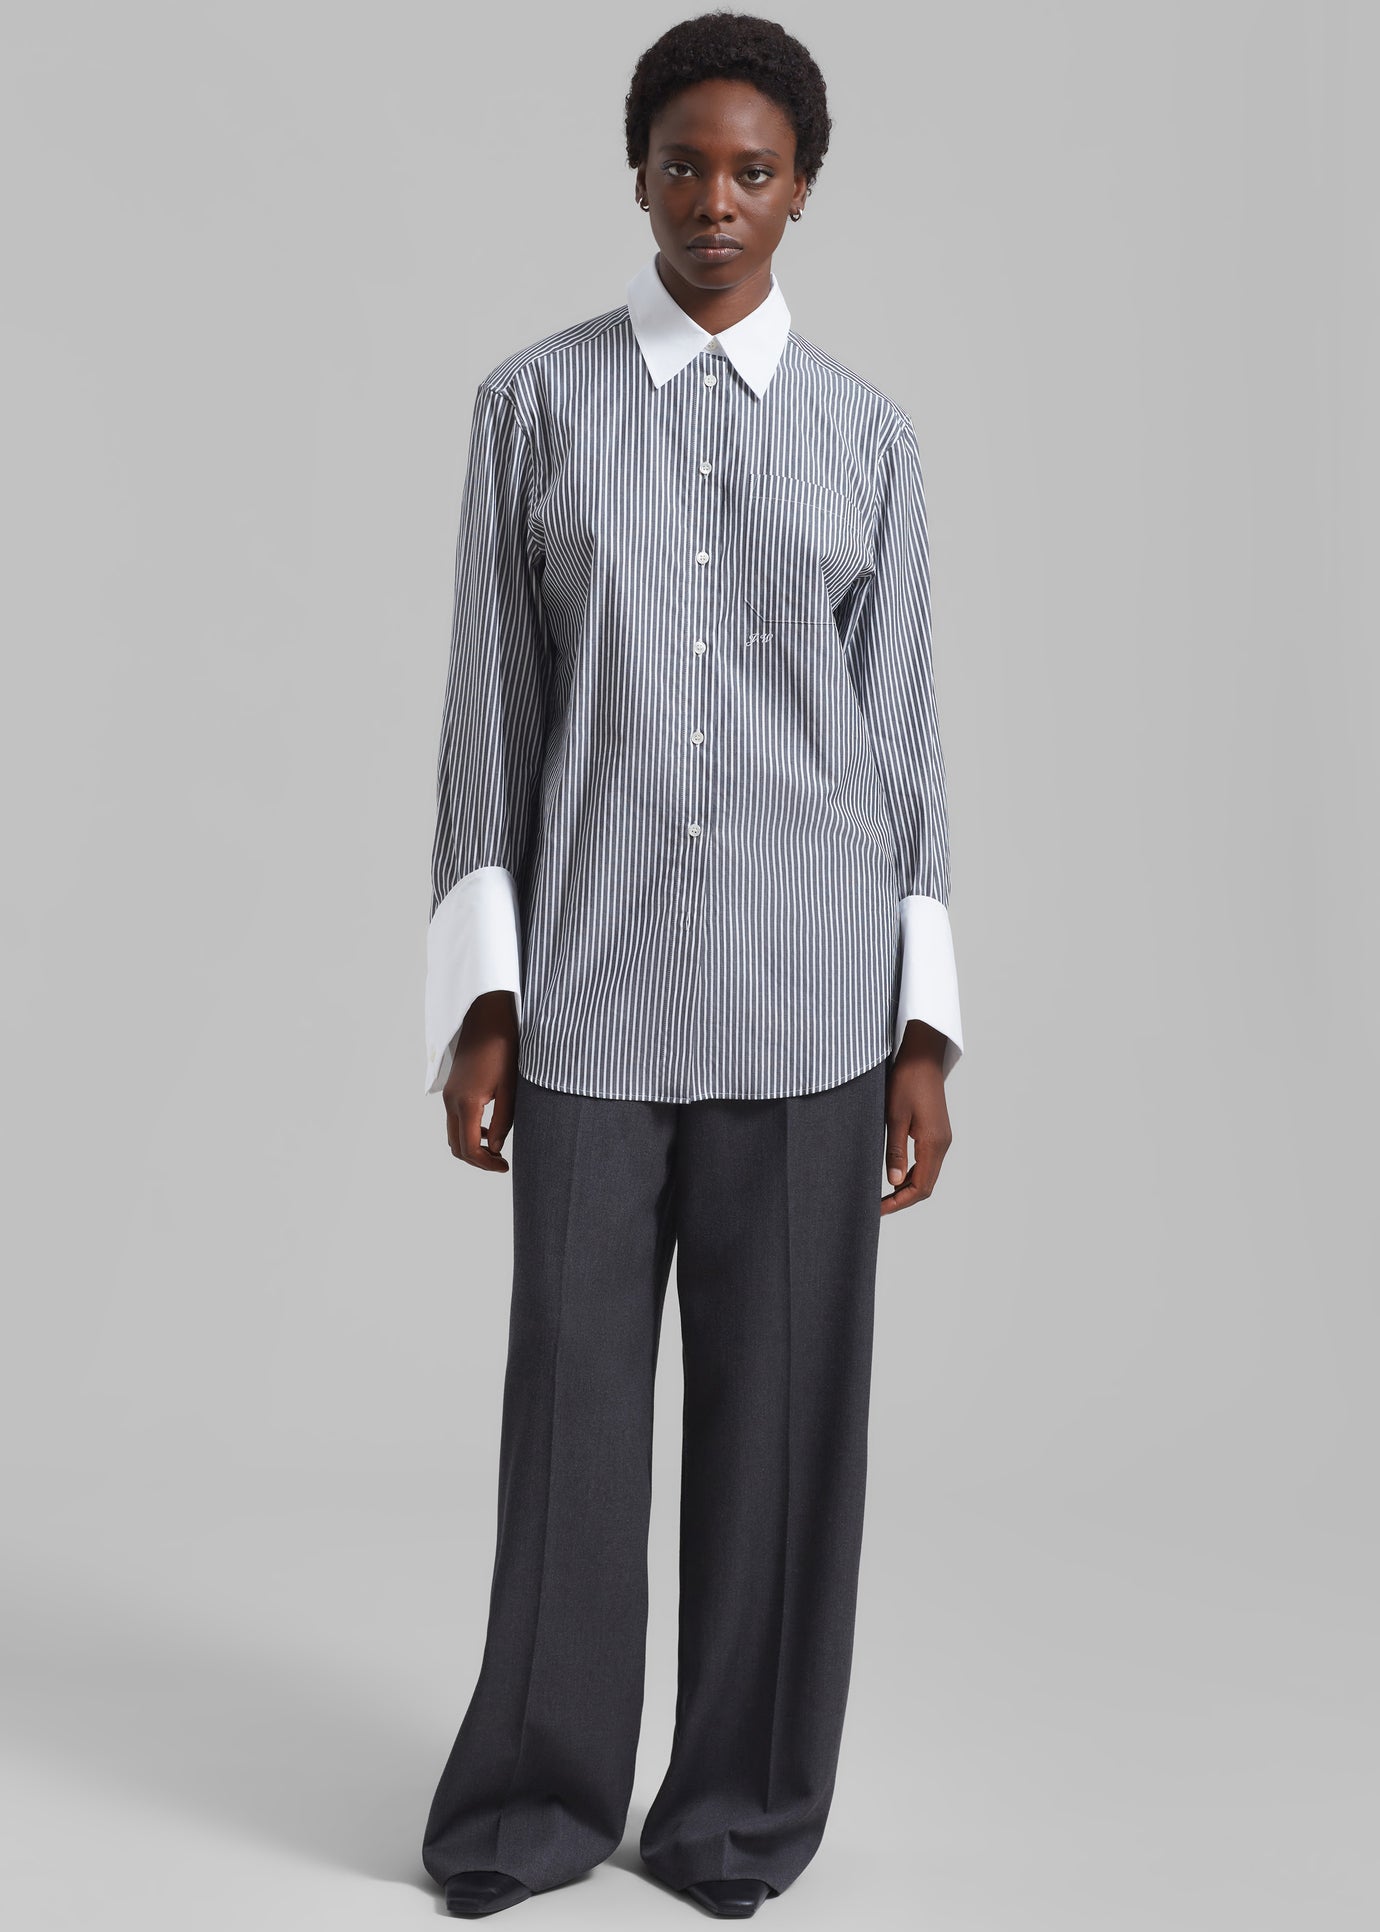 JW Anderson Oversized Cuff Shirt - Charcoal/White